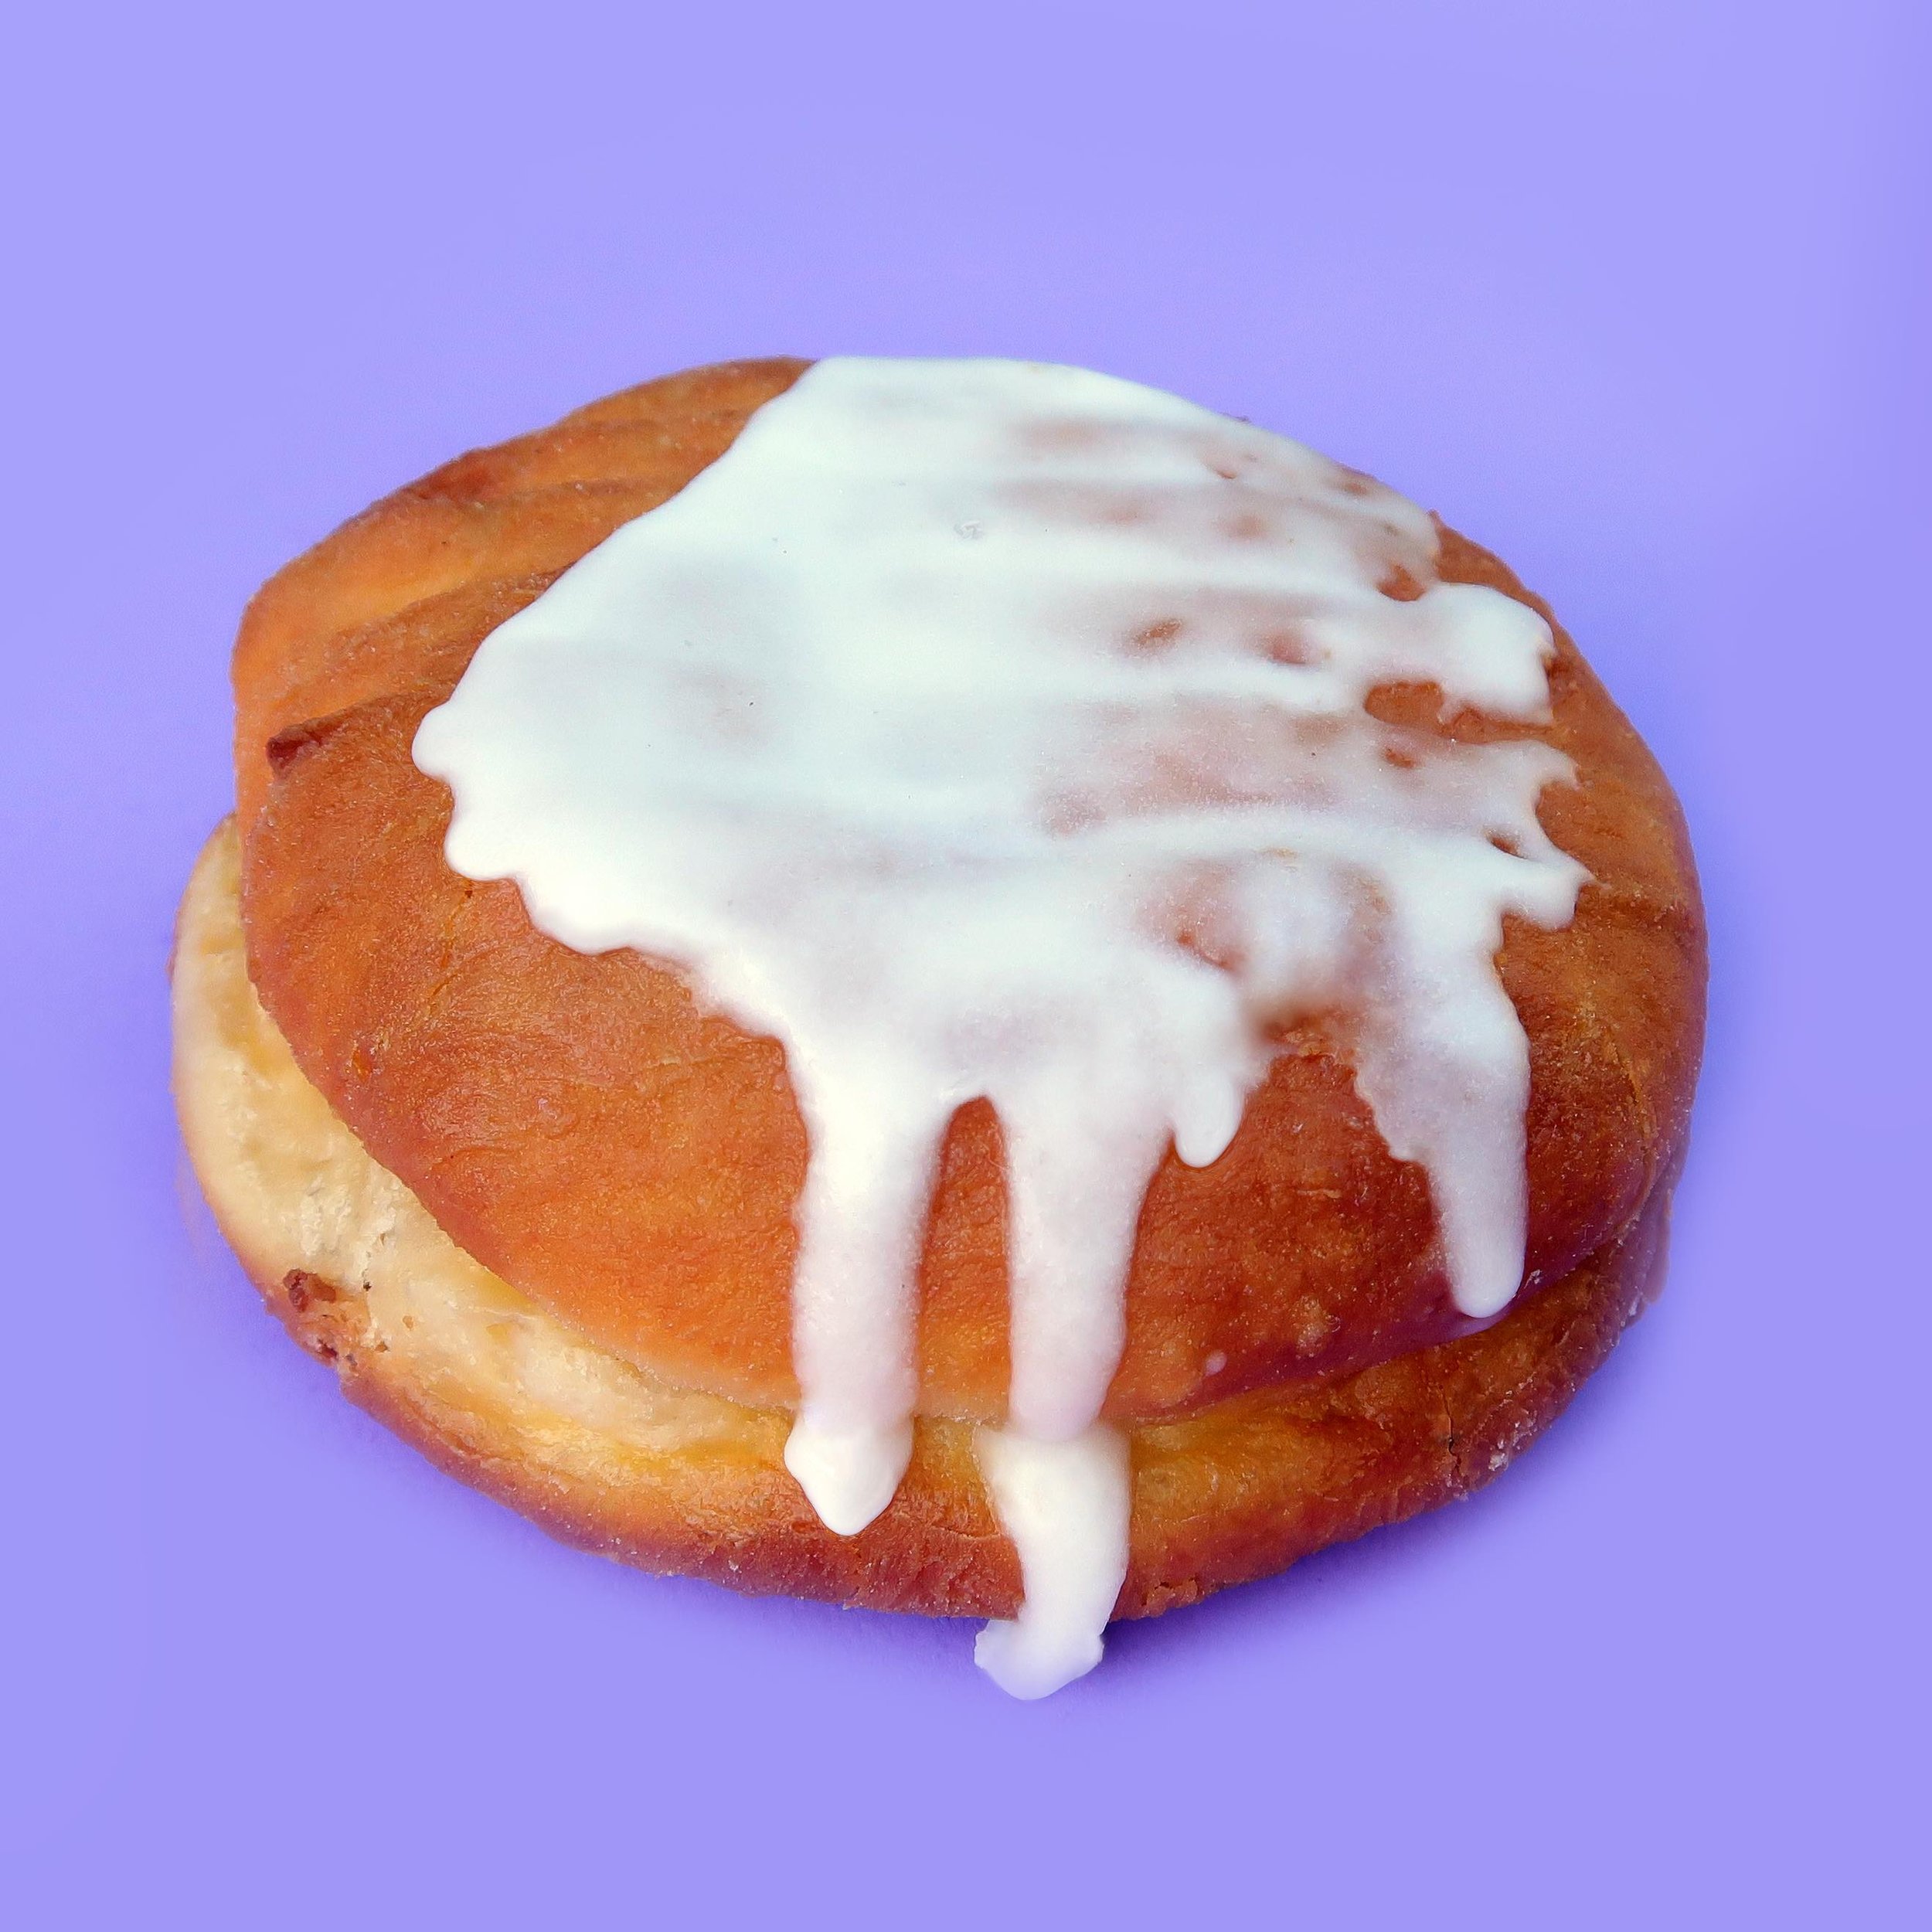 Dreaming of paradise? Our Coconut Rum Filled Donuts can help 😌

These tropical treats are on the menu &lsquo;til Sunday!